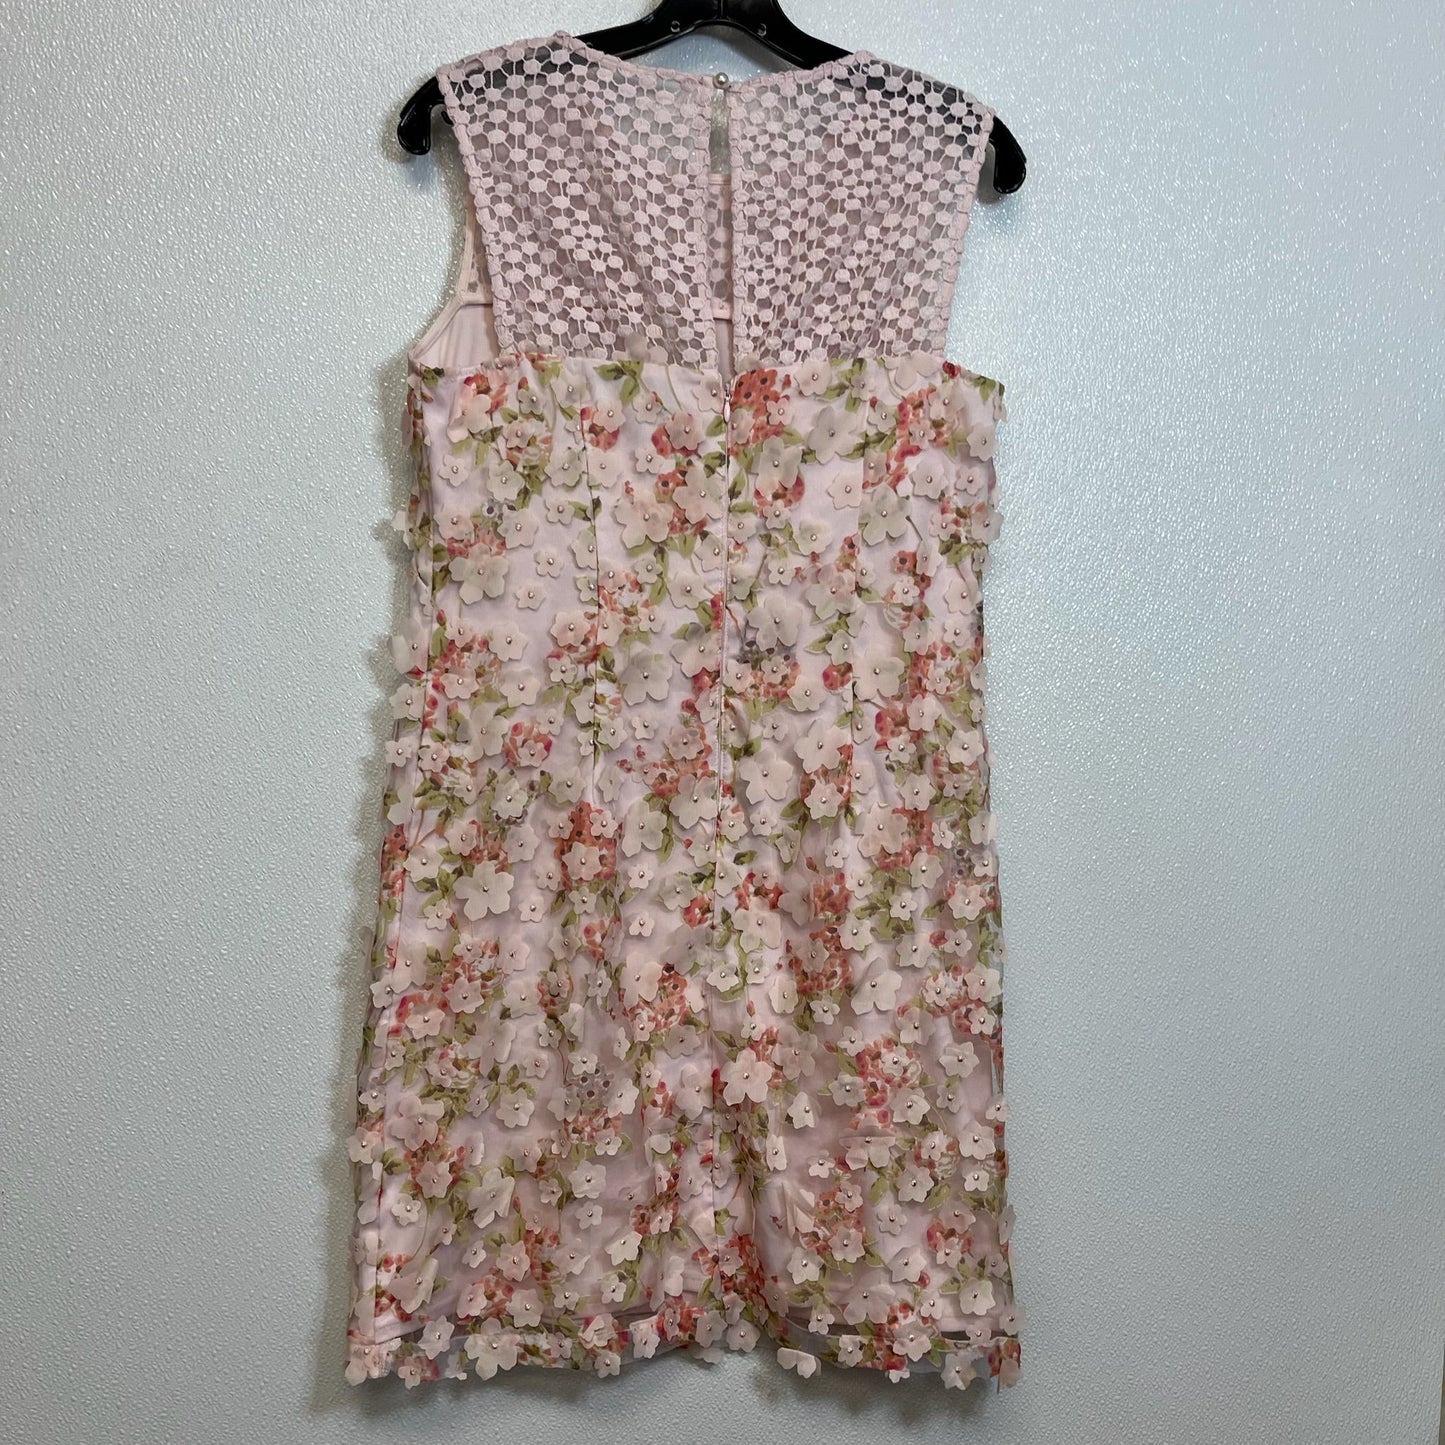 Floral Dress Casual Short Karl Lagerfeld, Size 6